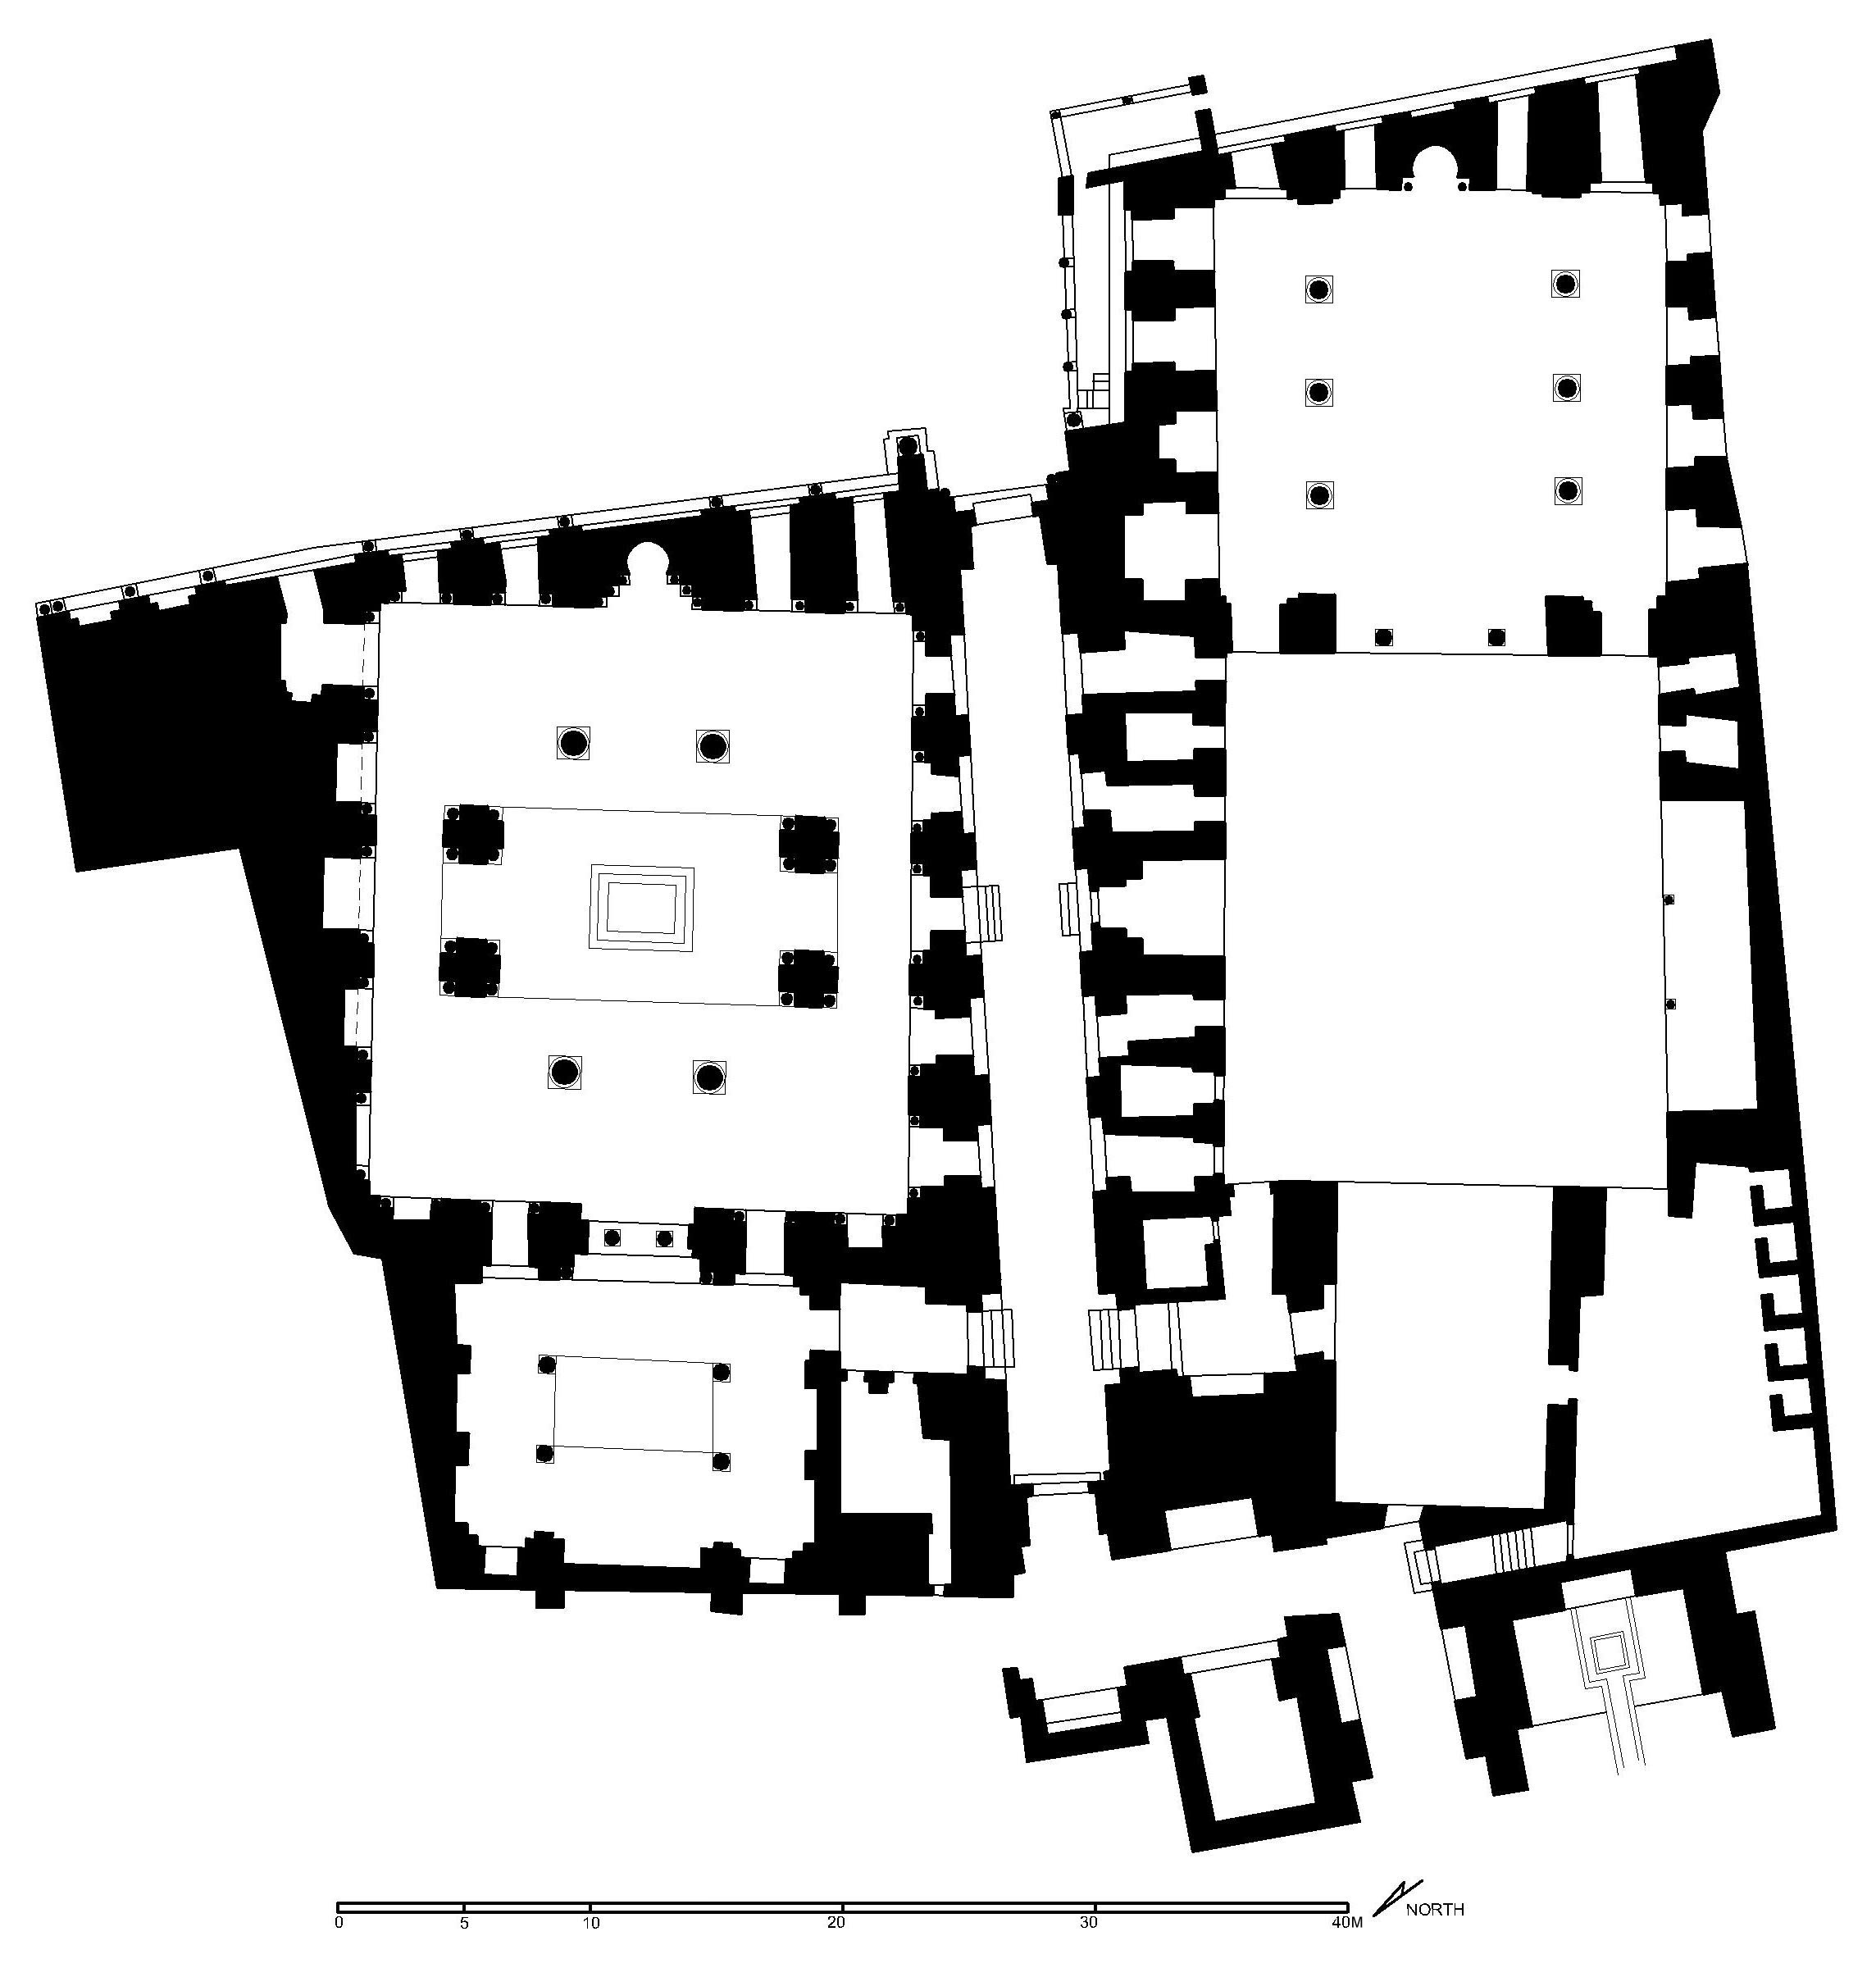 Madrasa wa Qubbat wa Bimaristan al-Sultan Qalawun - Floor plan of complex (after Meinecke) in AutoCAD 2000 format. Click the download button to download a zipped file containing the .dwg file.